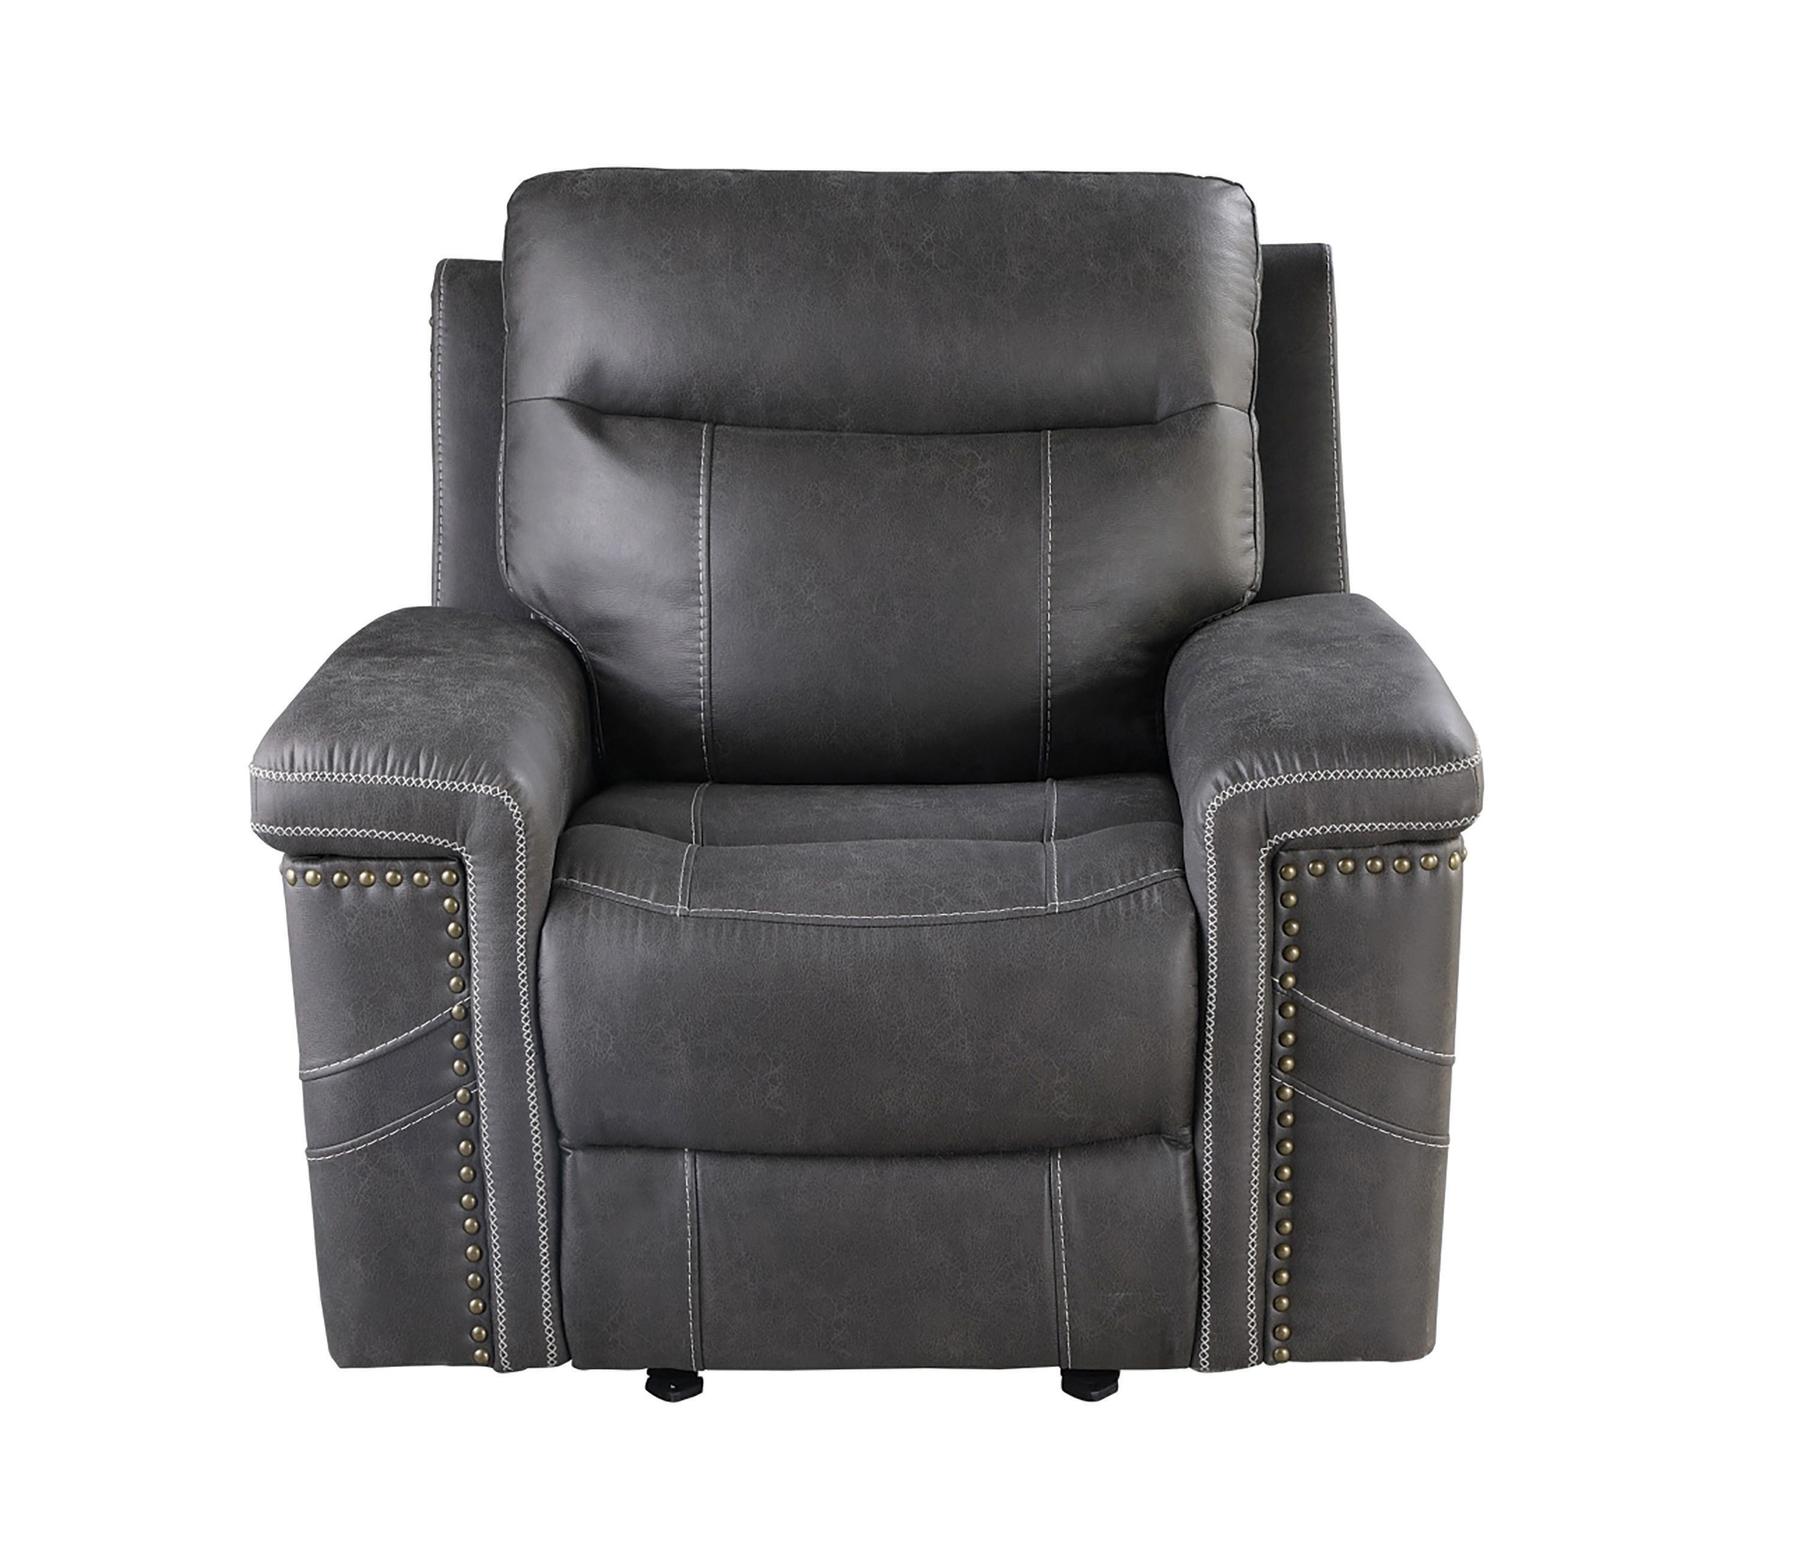 Modern Power recliner 603516PP Wixom 603516PP in Charcoal 